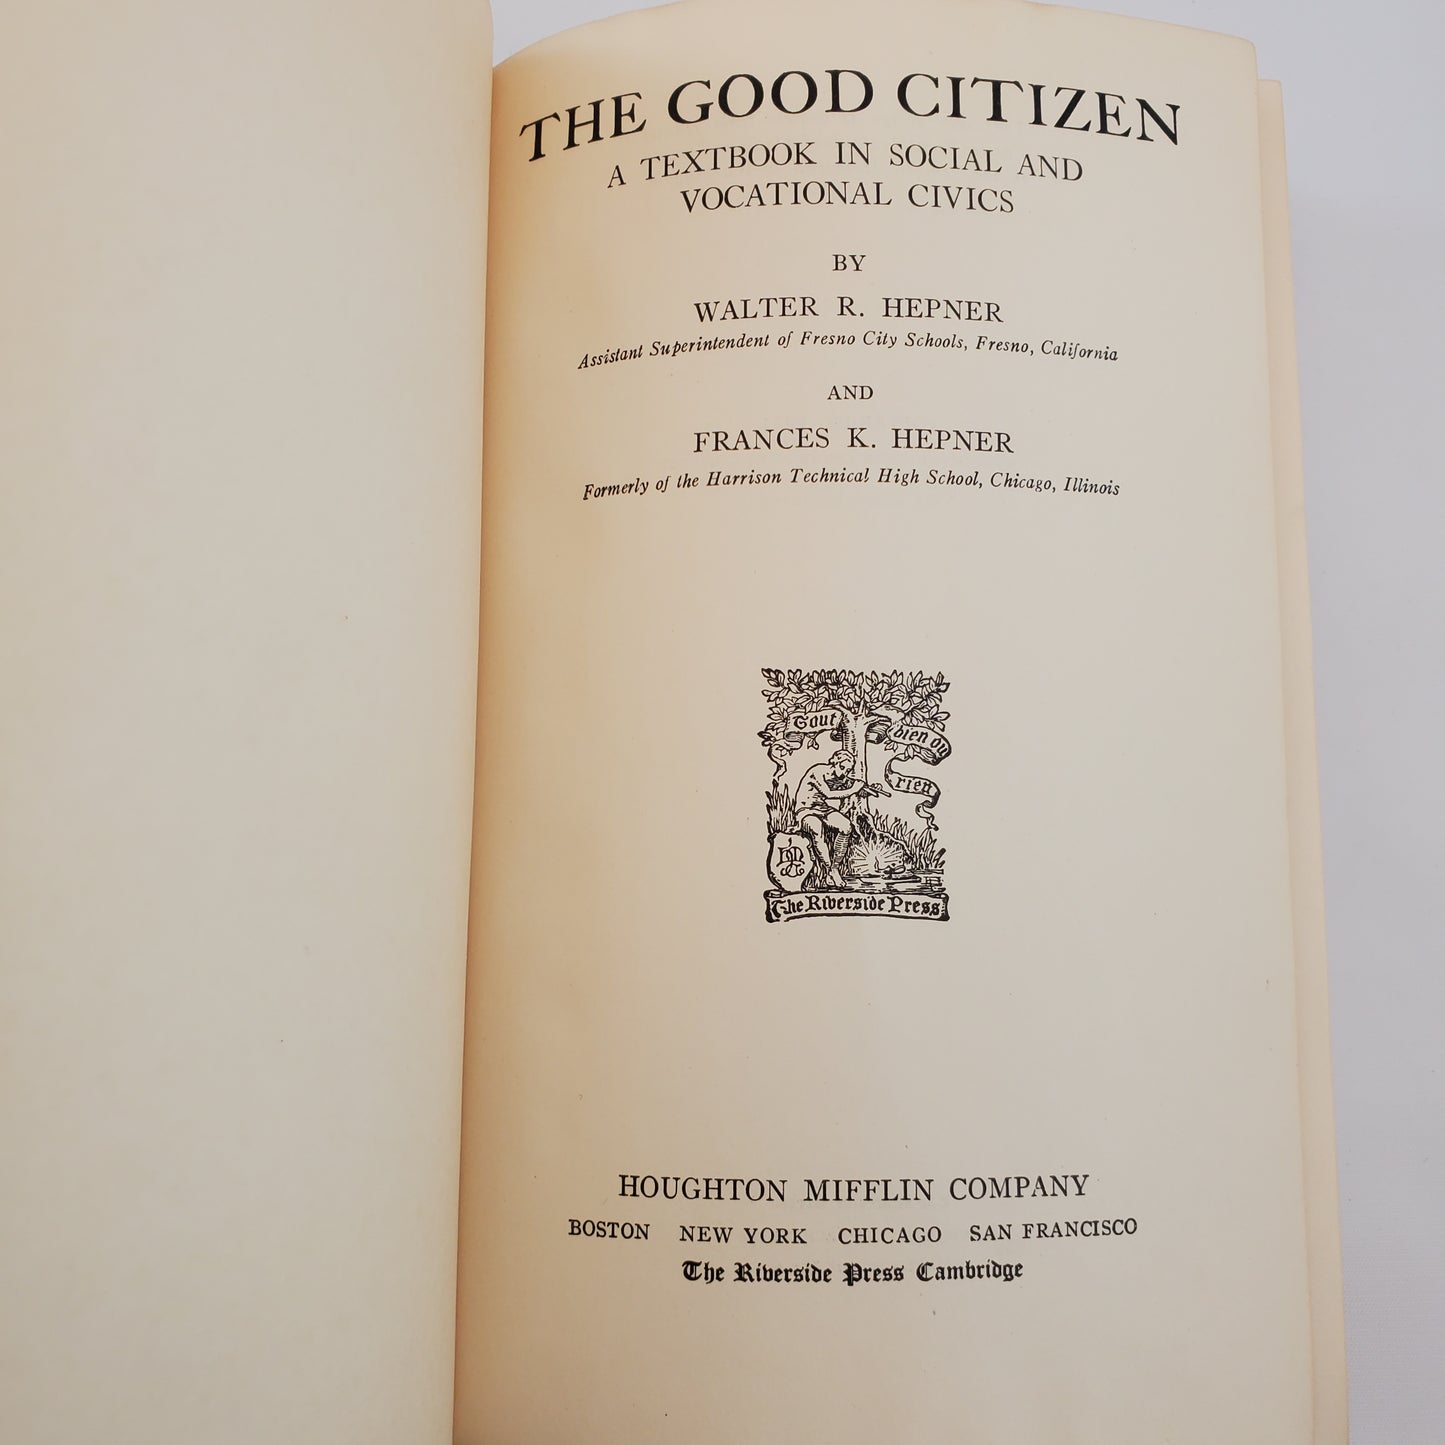 The Good Citizen: A Textbook in Social and Vocational Civics